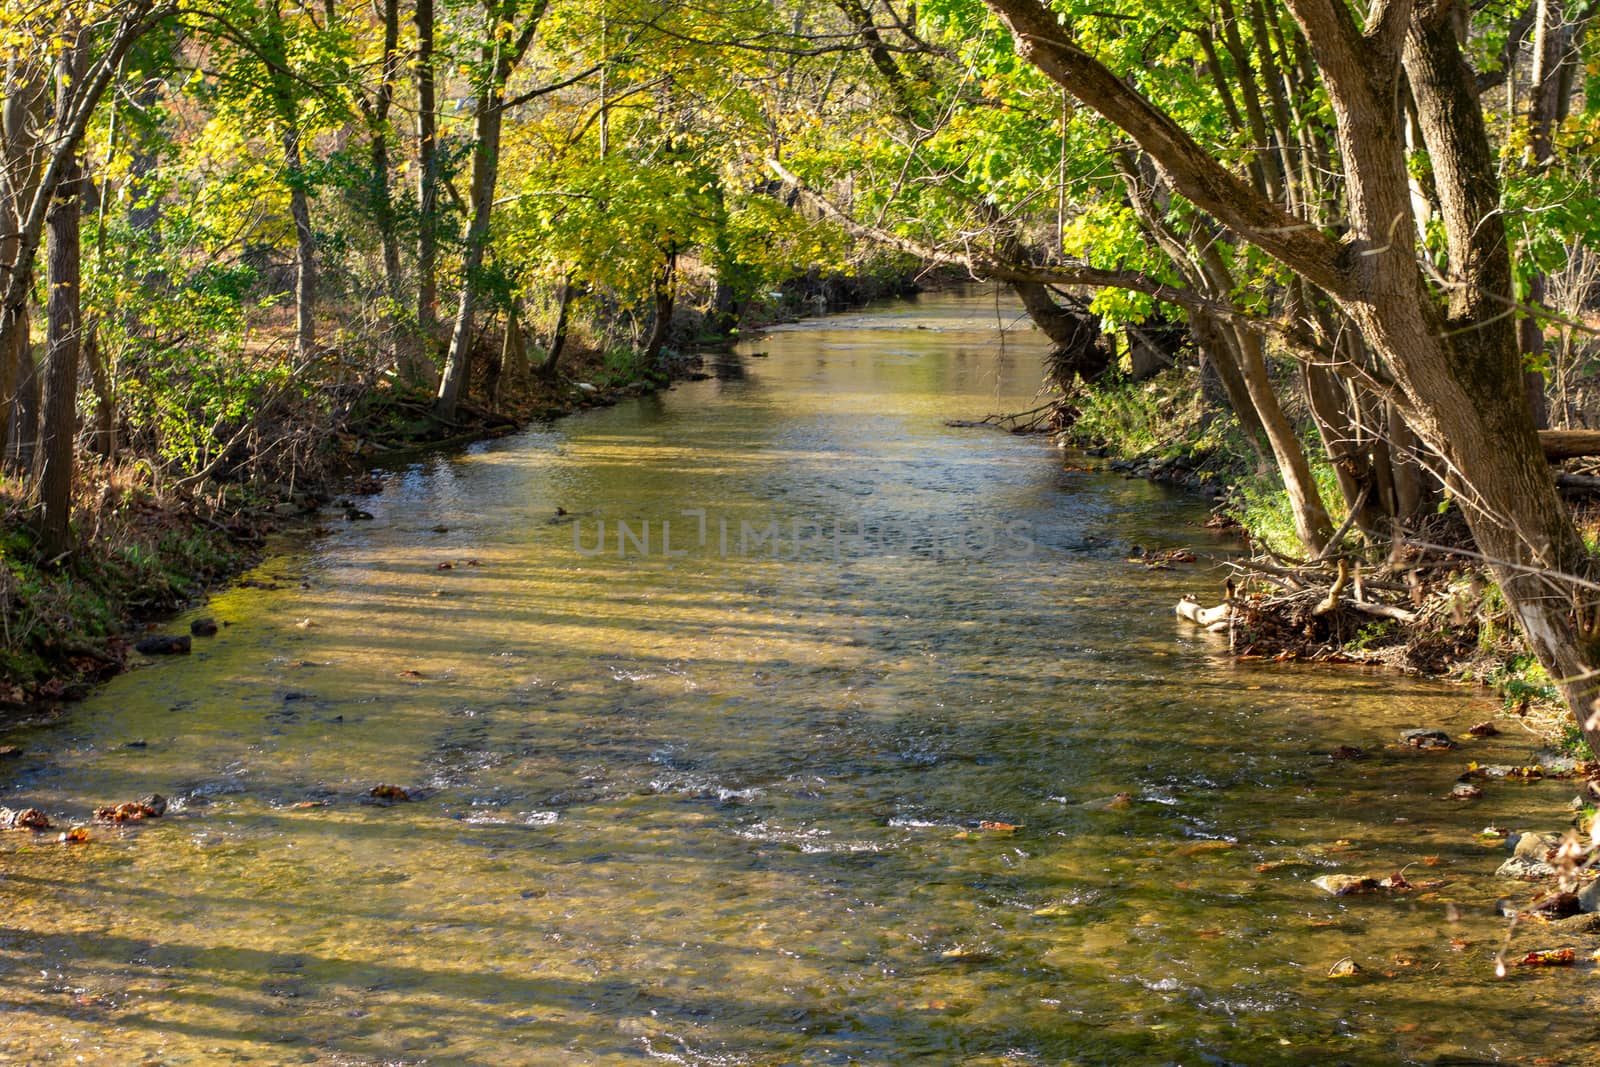 A Shallow Stream on a Clear Autumn Day by bju12290